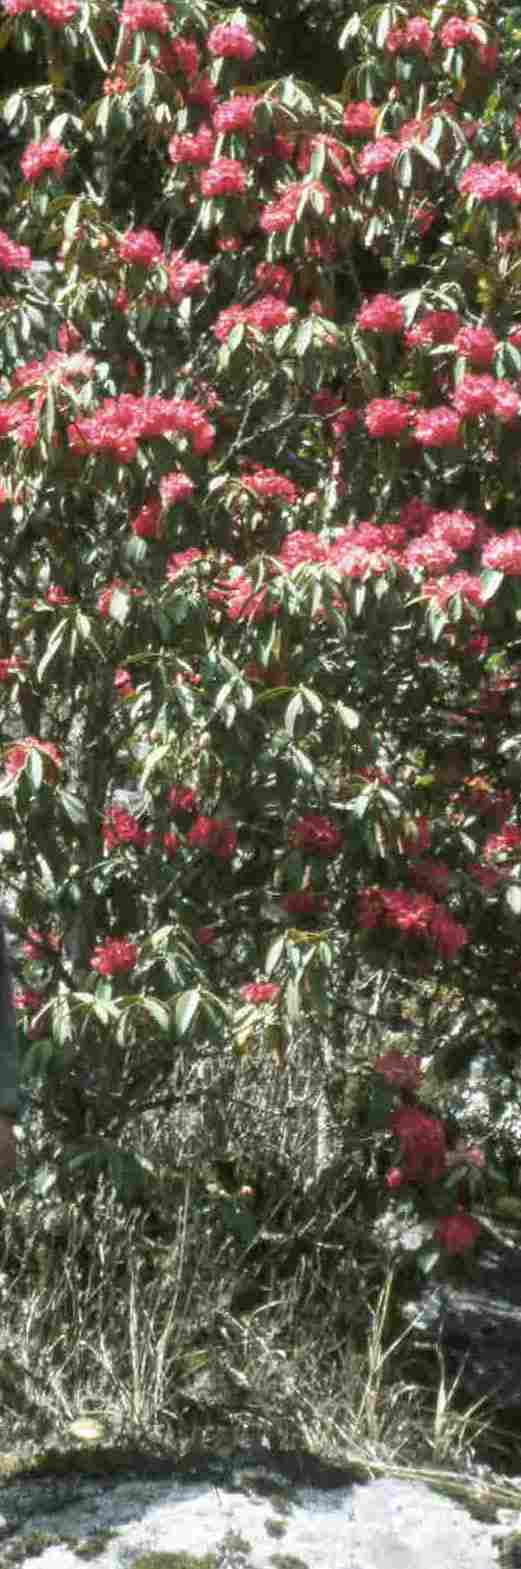 Red rhododendron